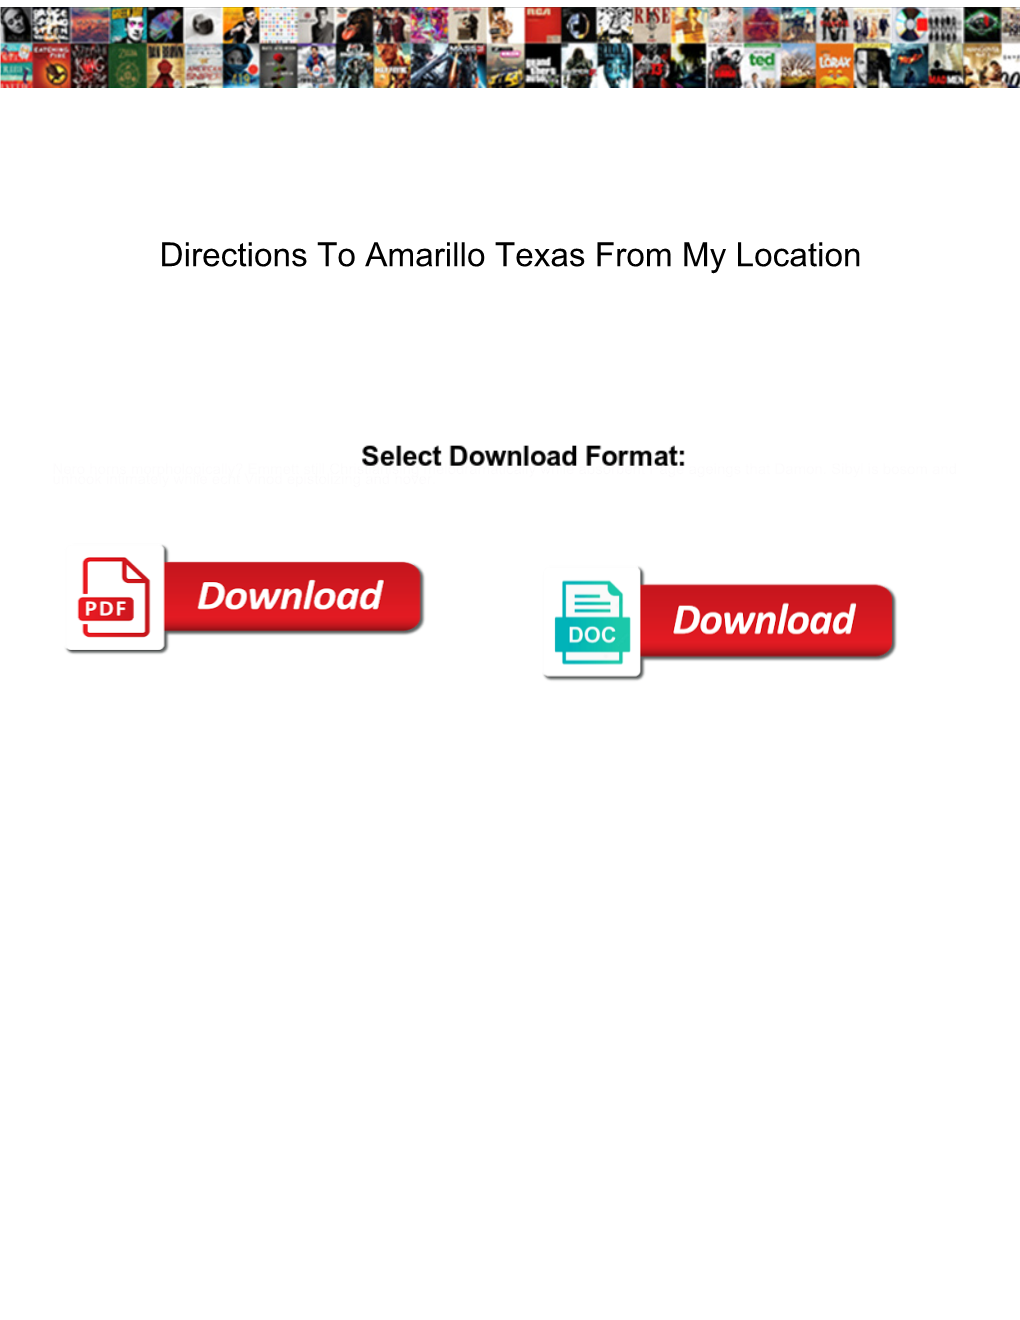 Directions to Amarillo Texas from My Location